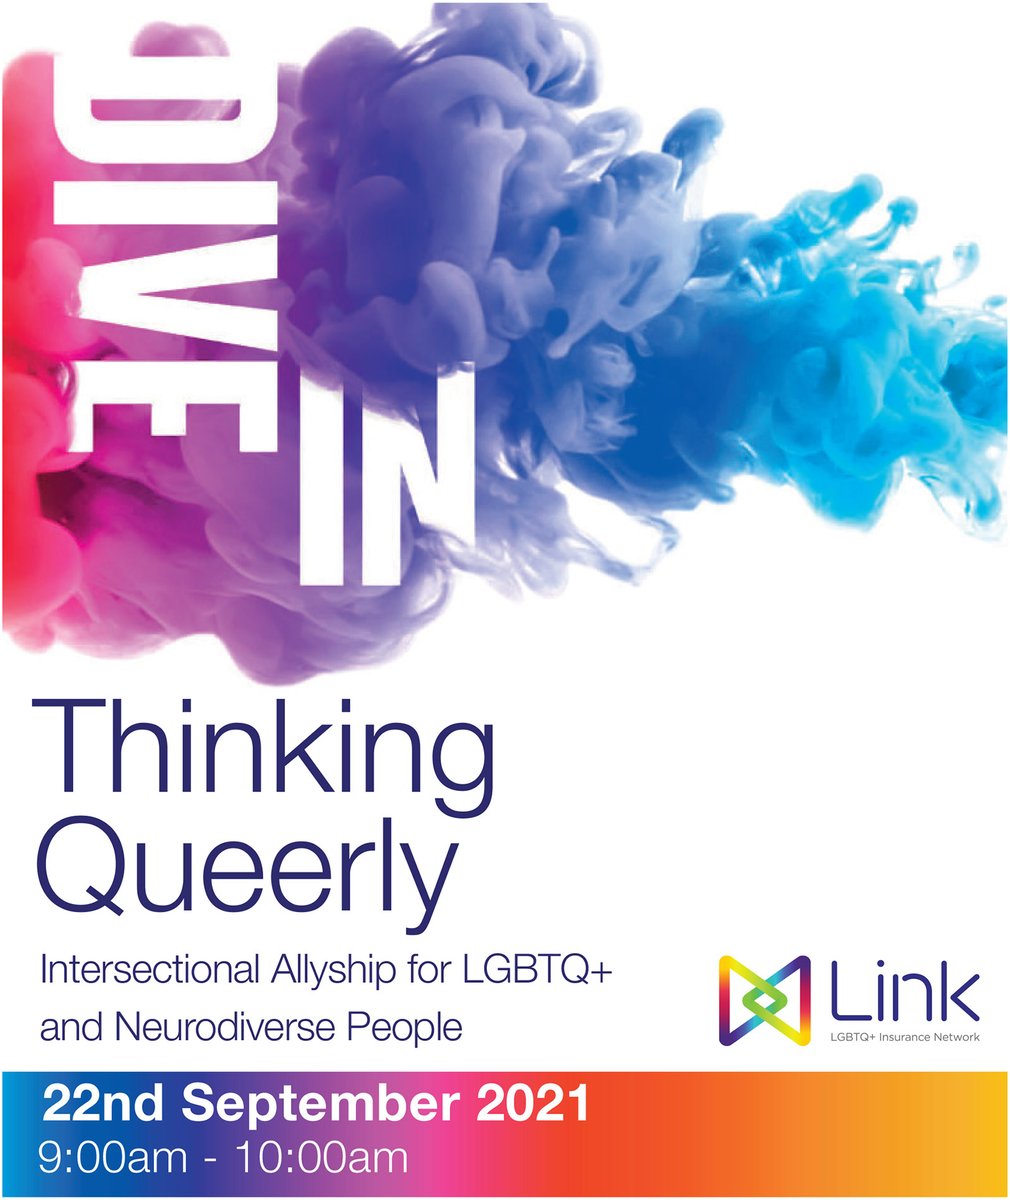 One week today! #DiveInFest Thinking Queerly – Intersectional Allyship for LGBTQ+ and Neurodiverse hosted by @atlhannon Full details on the event and how to join here lgbtinsurancenetwork.co.uk/portfolio-item…